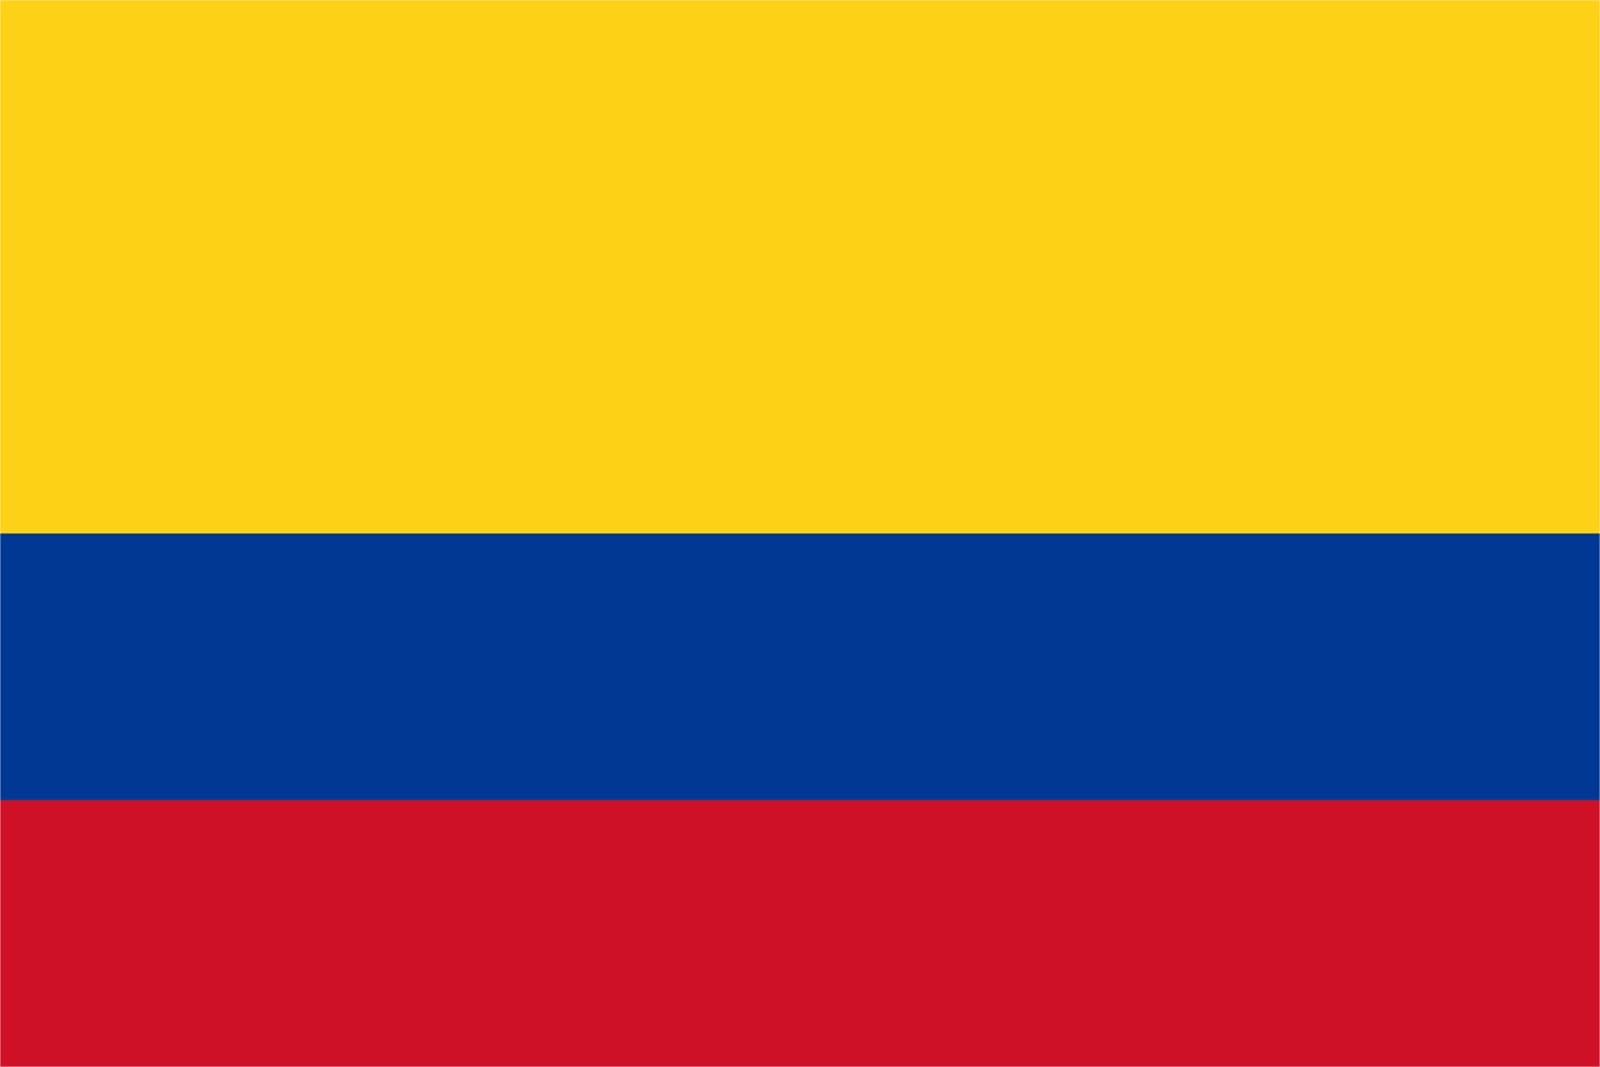 (c) Podcast-colombia.co